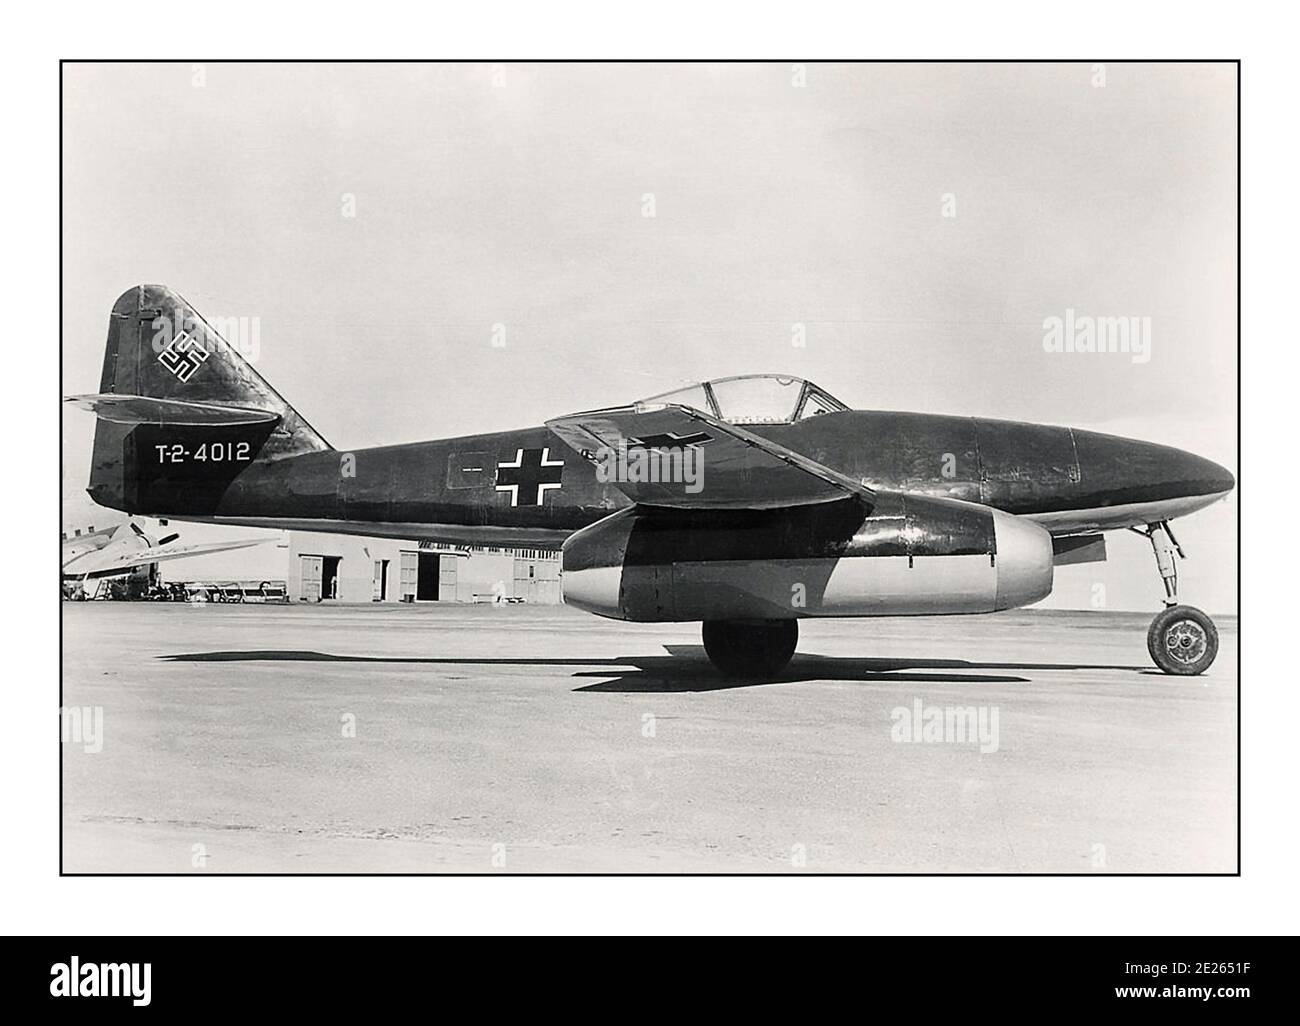 WW2 German Messerschmitt Me-262 jet fighter of the Nazi Luftwaffe 1945 Archive WW2 World War II  The Messerschmitt Me 262, nicknamed Schwalbe (German: 'Swallow') in fighter versions, or Sturmvogel (German: 'Storm Bird') in fighter-bomber versions, was the world's first operational jet-powered fighter aircraft, which had operational status with the Luftwaffe until mid-1944. The Me 262 was faster and more heavily armed than any Allied fighter.  One of the most advanced aviation designs in operational use during World War II Stock Photo